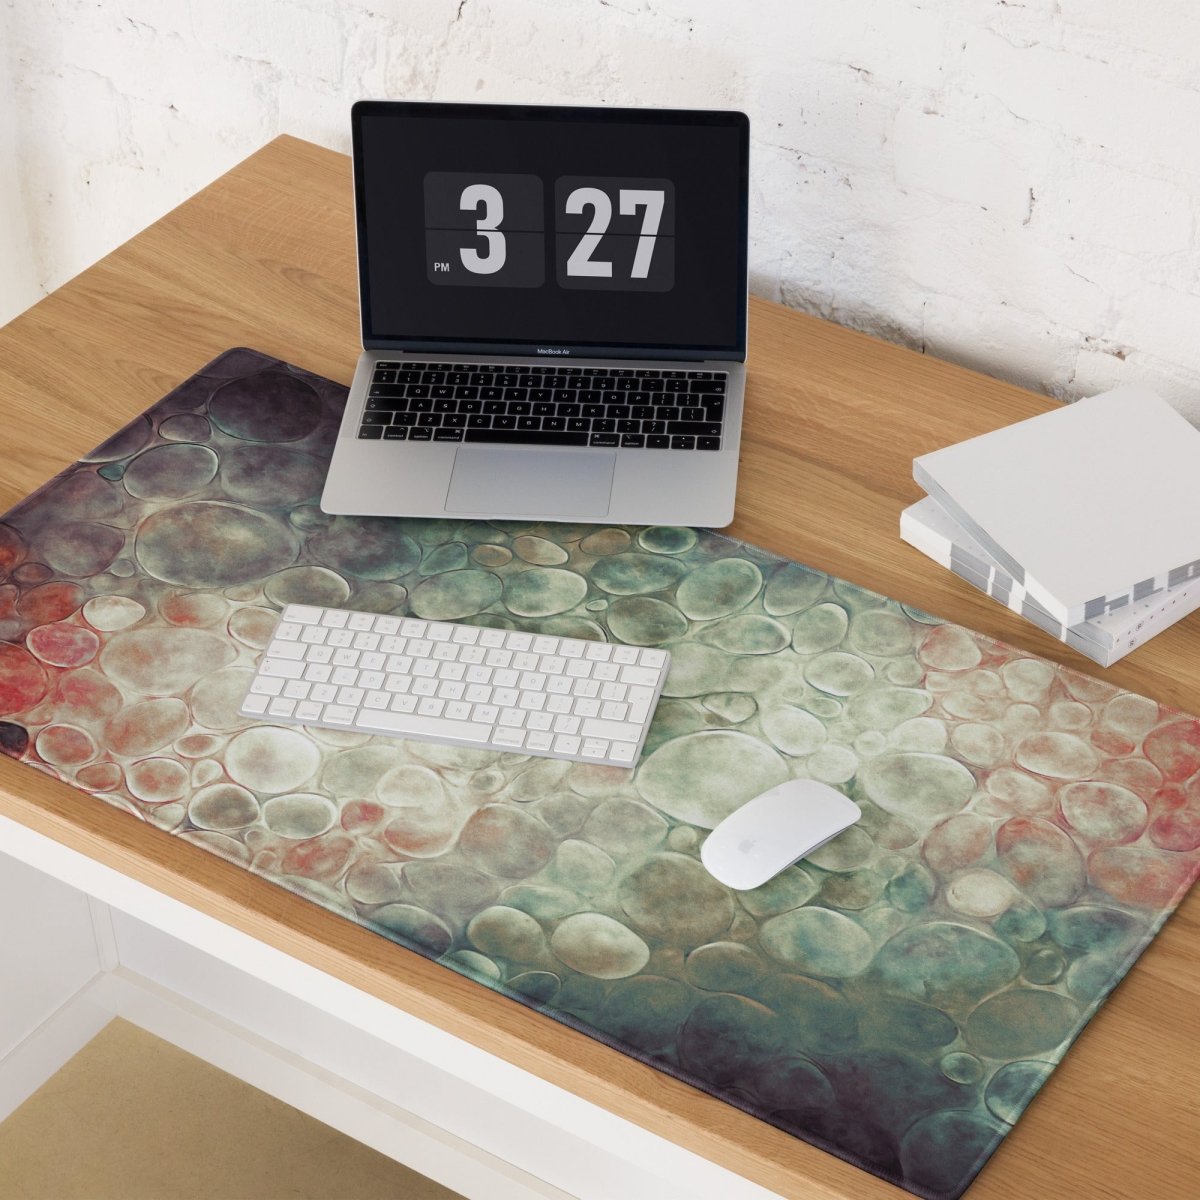 Pebble vanity - Gaming mouse pad - Ever colorful